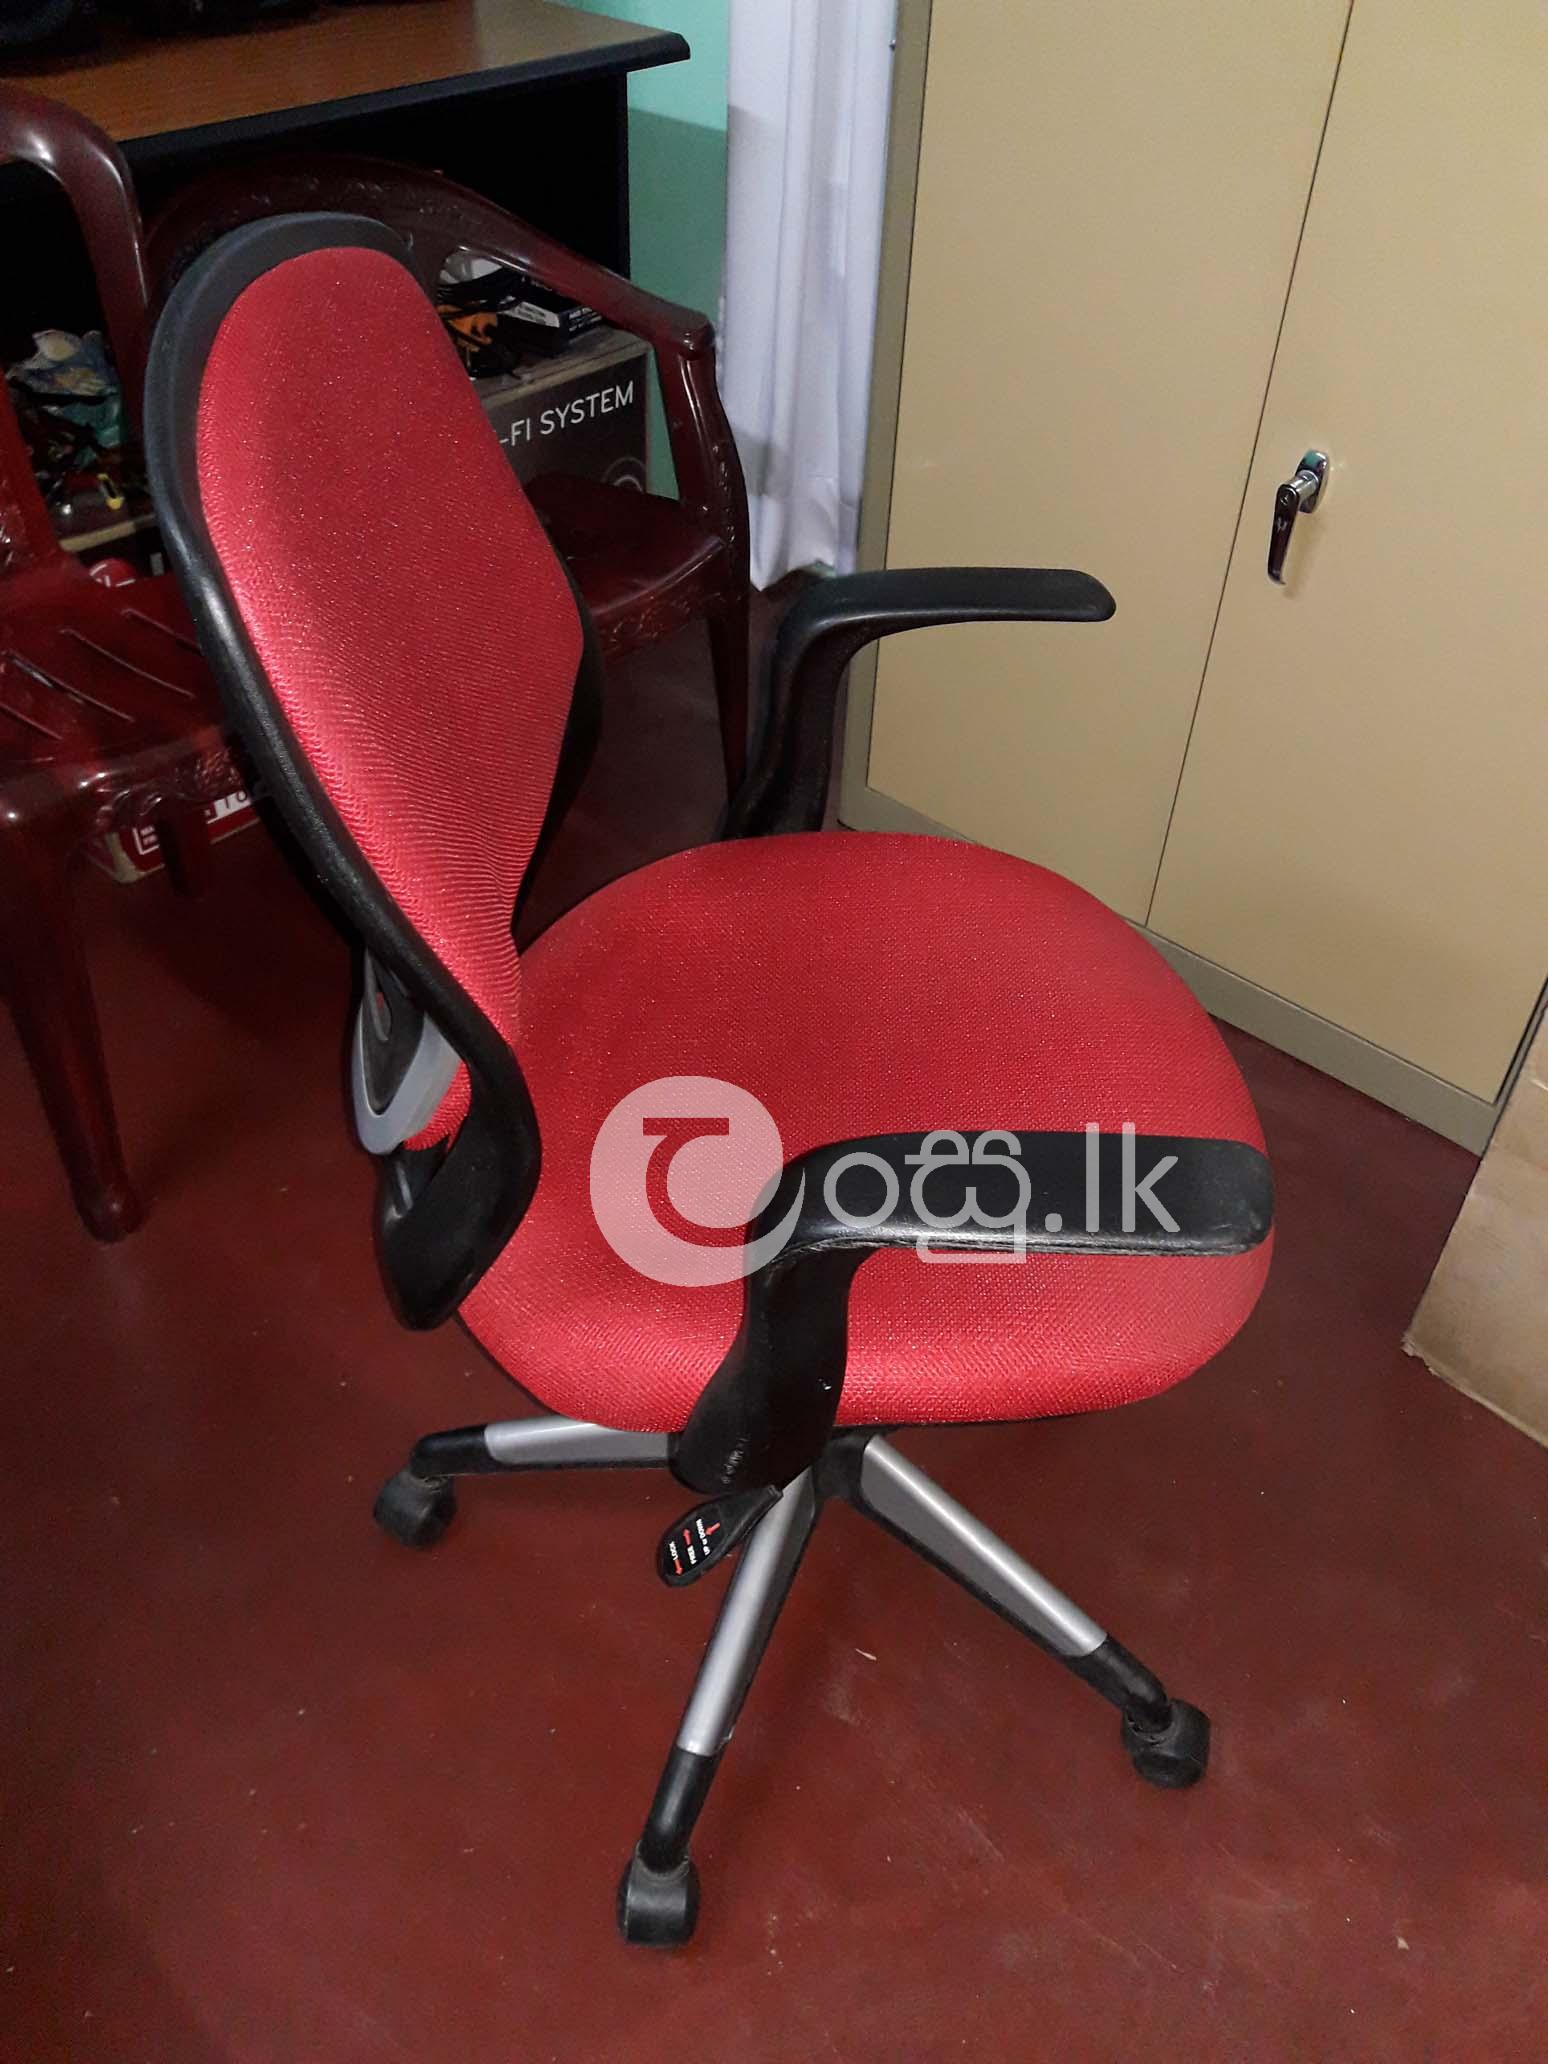 Damro Computer Chair - Computer Chair Damro : Damro Office Chairs Ocm